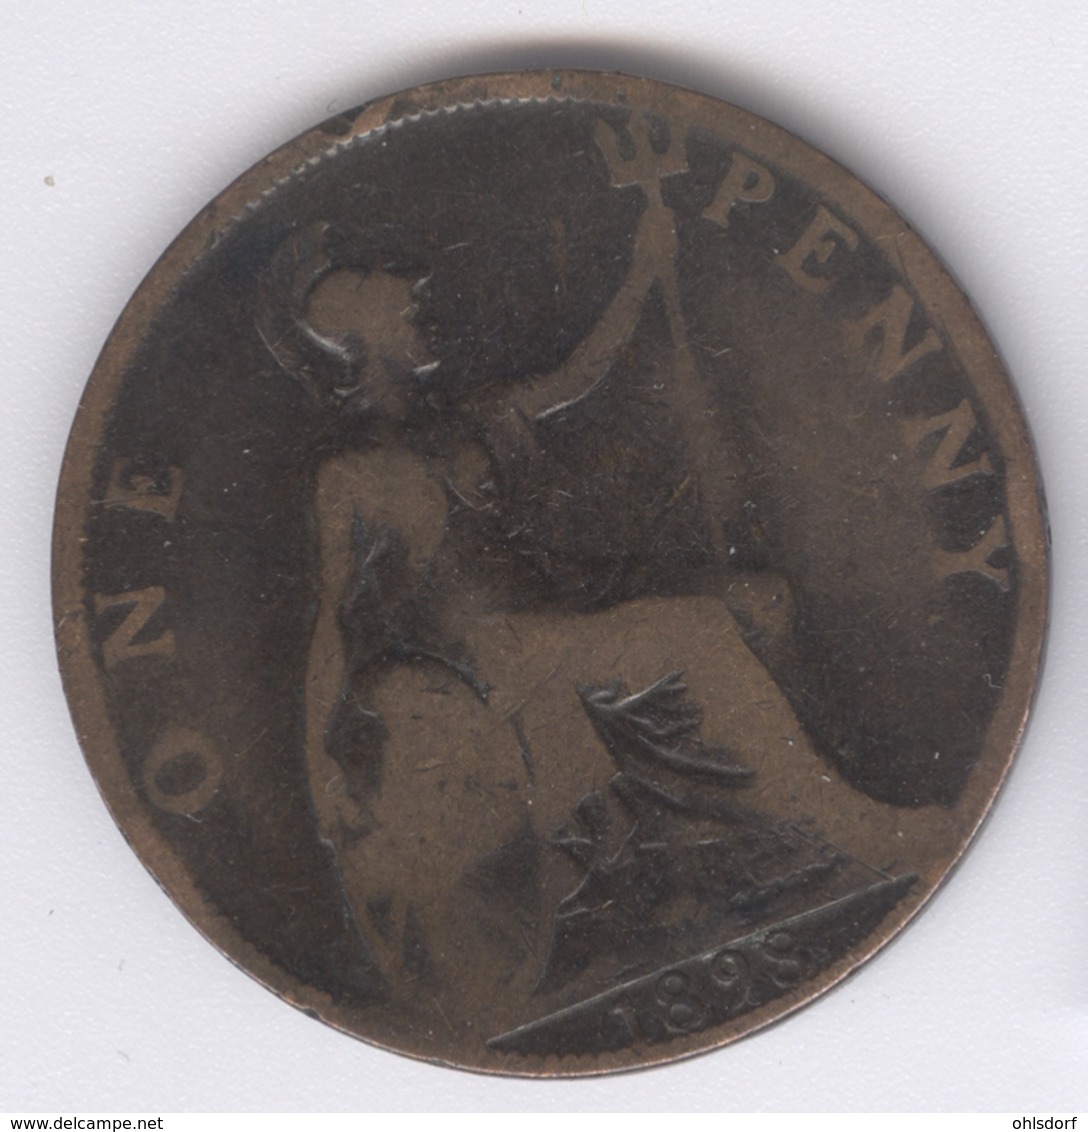 GREAT BRITAIN 1898: 1 Penny, KM 790 - D. 1 Penny